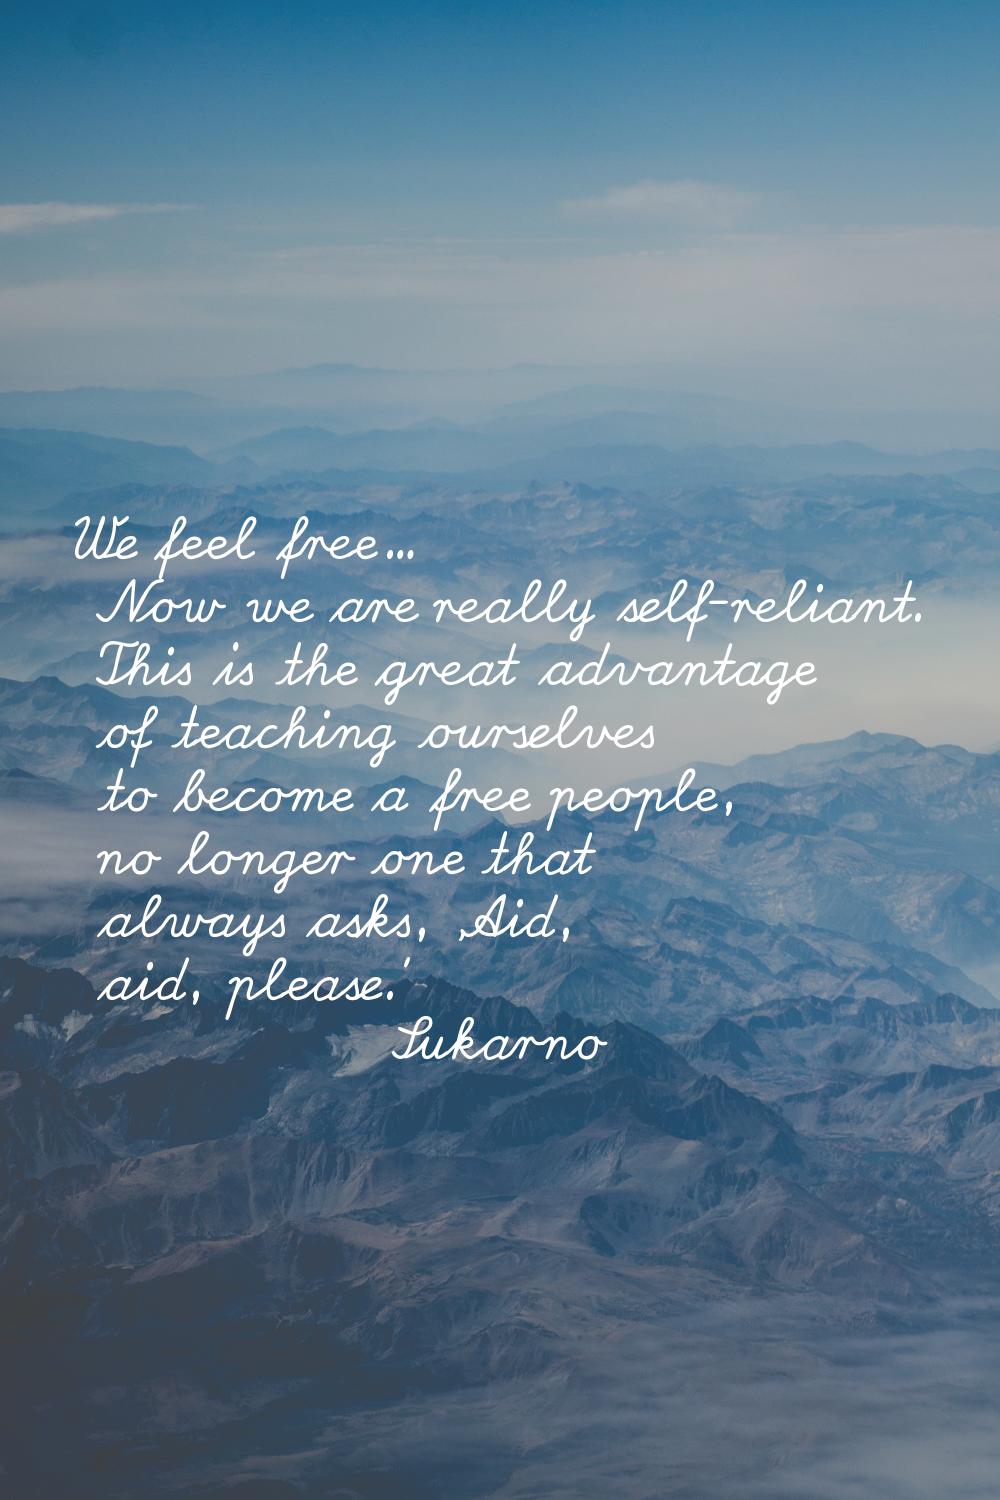 We feel free... Now we are really self-reliant. This is the great advantage of teaching ourselves t